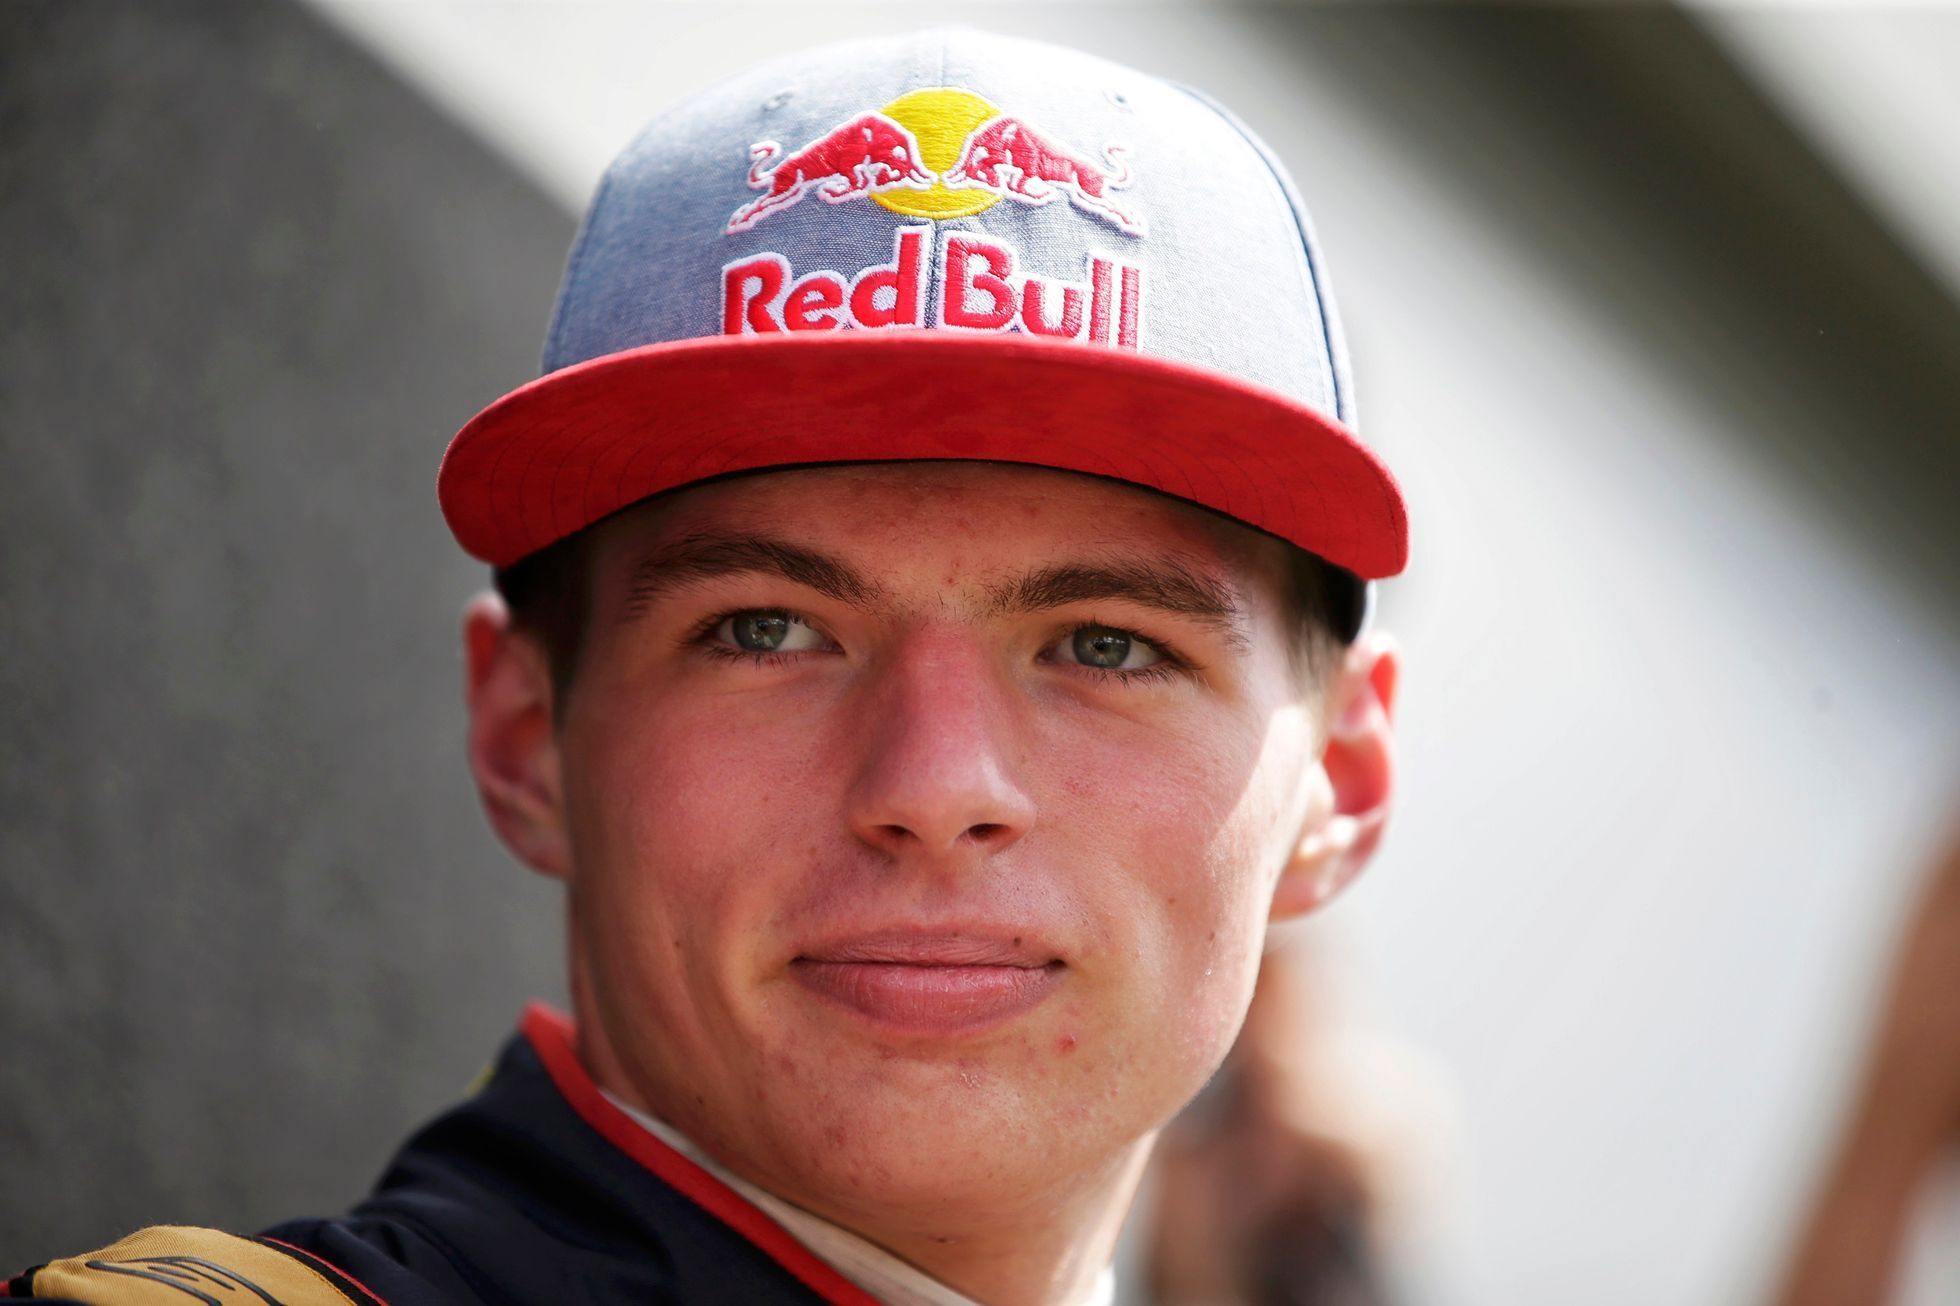 Toro Rosso Formula One driver Max Verstappen of the Netherlands poses during a photo session before the Australia Formula One Grand Prix, at Melbourne's Albert Park Track